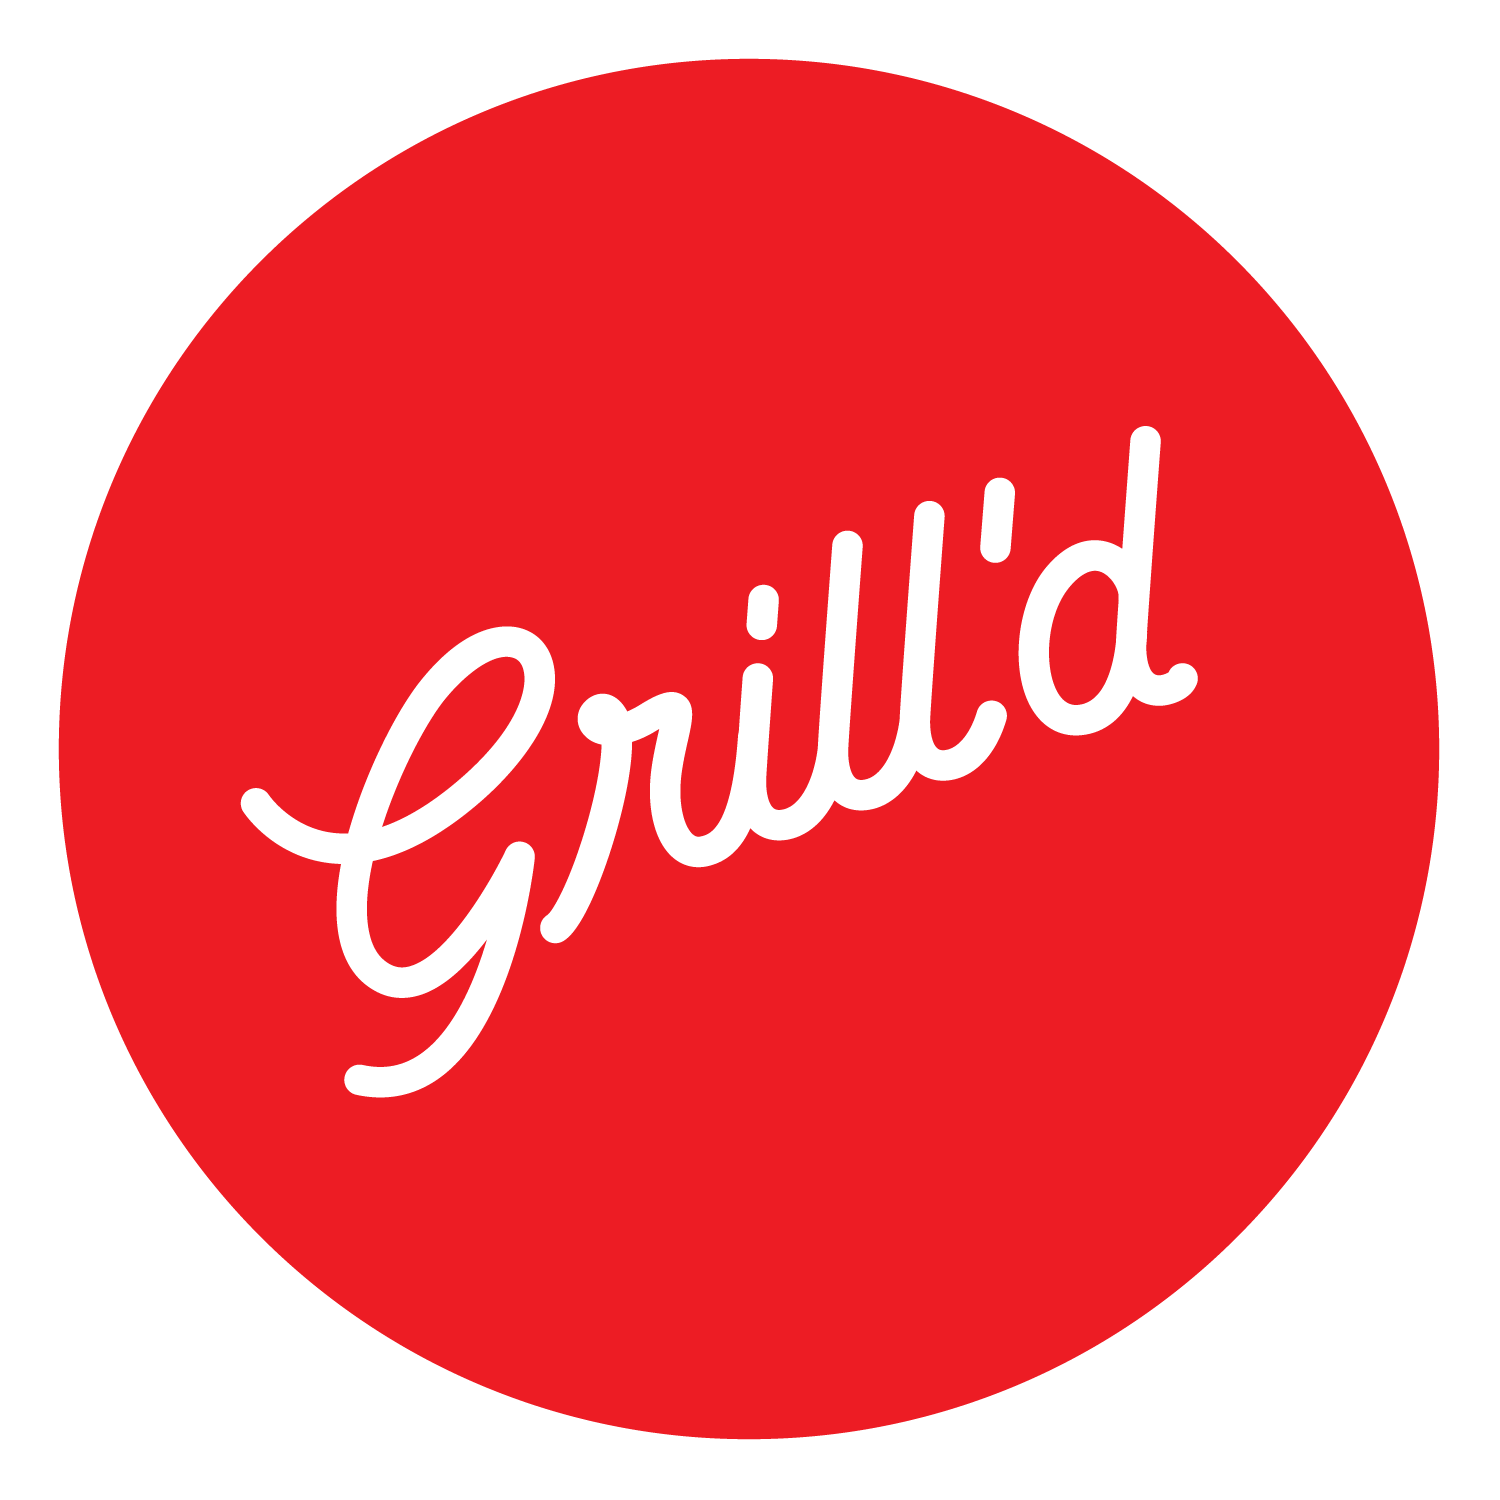 Grill’d game day voucher player award